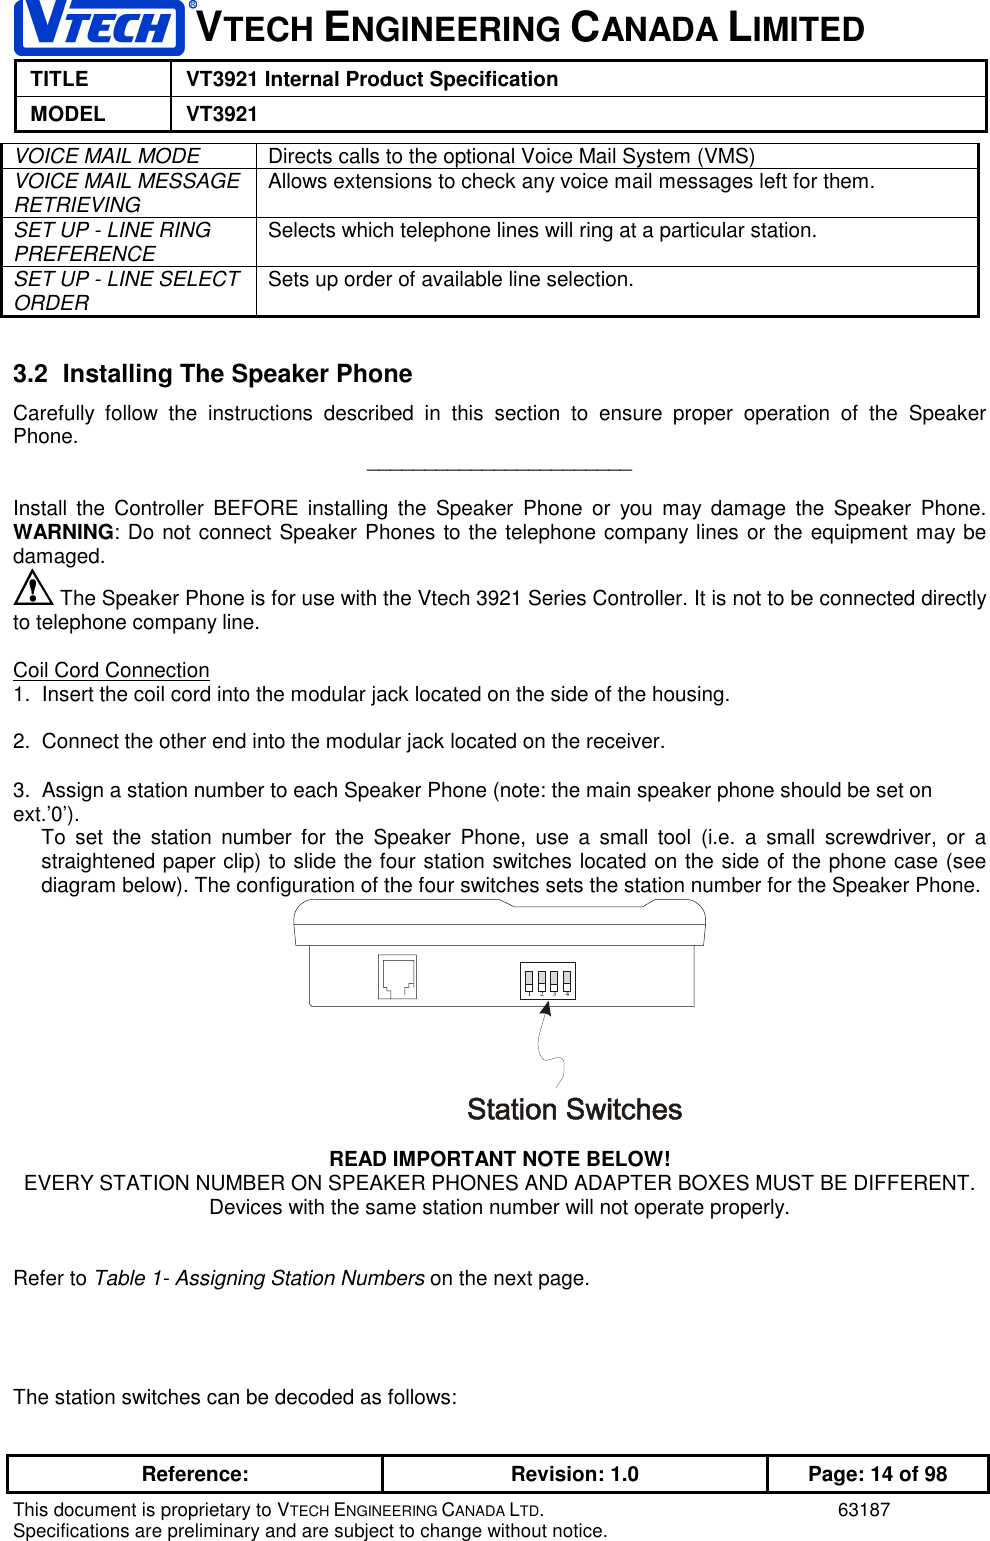 1VTECH ENGINEERING CANADA LIMITEDTITLE VT3921 Internal Product SpecificationMODEL VT3921Reference: Revision: 1.0 Page: 14 of 98This document is proprietary to VTECH ENGINEERING CANADA LTD. 63187Specifications are preliminary and are subject to change without notice.VOICE MAIL MODE Directs calls to the optional Voice Mail System (VMS)VOICE MAIL MESSAGERETRIEVING Allows extensions to check any voice mail messages left for them.SET UP - LINE RINGPREFERENCE Selects which telephone lines will ring at a particular station.SET UP - LINE SELECTORDER Sets up order of available line selection.3.2  Installing The Speaker PhoneCarefully follow the instructions described in this section to ensure proper operation of the SpeakerPhone. _______________________Install the Controller BEFORE installing the Speaker Phone or you may damage the Speaker Phone.WARNING: Do not connect Speaker Phones to the telephone company lines or the equipment may bedamaged. The Speaker Phone is for use with the Vtech 3921 Series Controller. It is not to be connected directlyto telephone company line.Coil Cord Connection1.  Insert the coil cord into the modular jack located on the side of the housing.2.  Connect the other end into the modular jack located on the receiver.3.  Assign a station number to each Speaker Phone (note: the main speaker phone should be set onext.’0’).To set the station number for the Speaker Phone, use a small tool (i.e. a small screwdriver, or astraightened paper clip) to slide the four station switches located on the side of the phone case (seediagram below). The configuration of the four switches sets the station number for the Speaker Phone.2341READ IMPORTANT NOTE BELOW!EVERY STATION NUMBER ON SPEAKER PHONES AND ADAPTER BOXES MUST BE DIFFERENT.Devices with the same station number will not operate properly.Refer to Table 1- Assigning Station Numbers on the next page.The station switches can be decoded as follows: